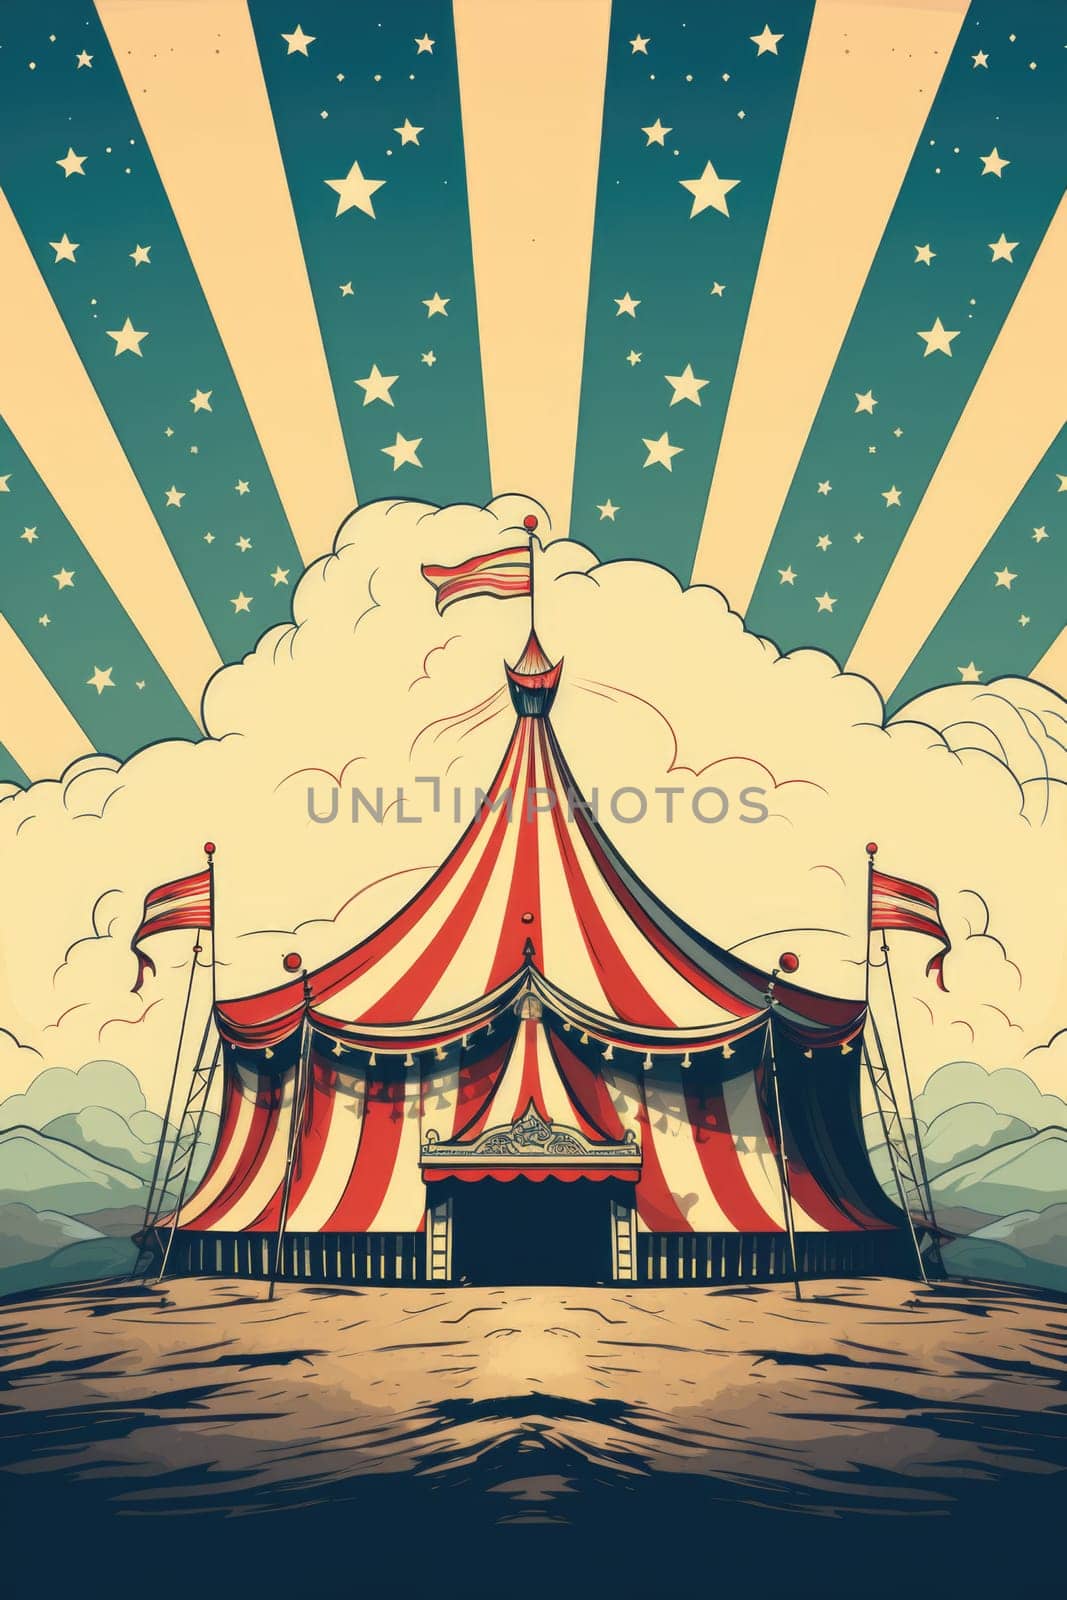 Circus tent against the sky with diverging rays. Circus poster, poster. World Circus Day.